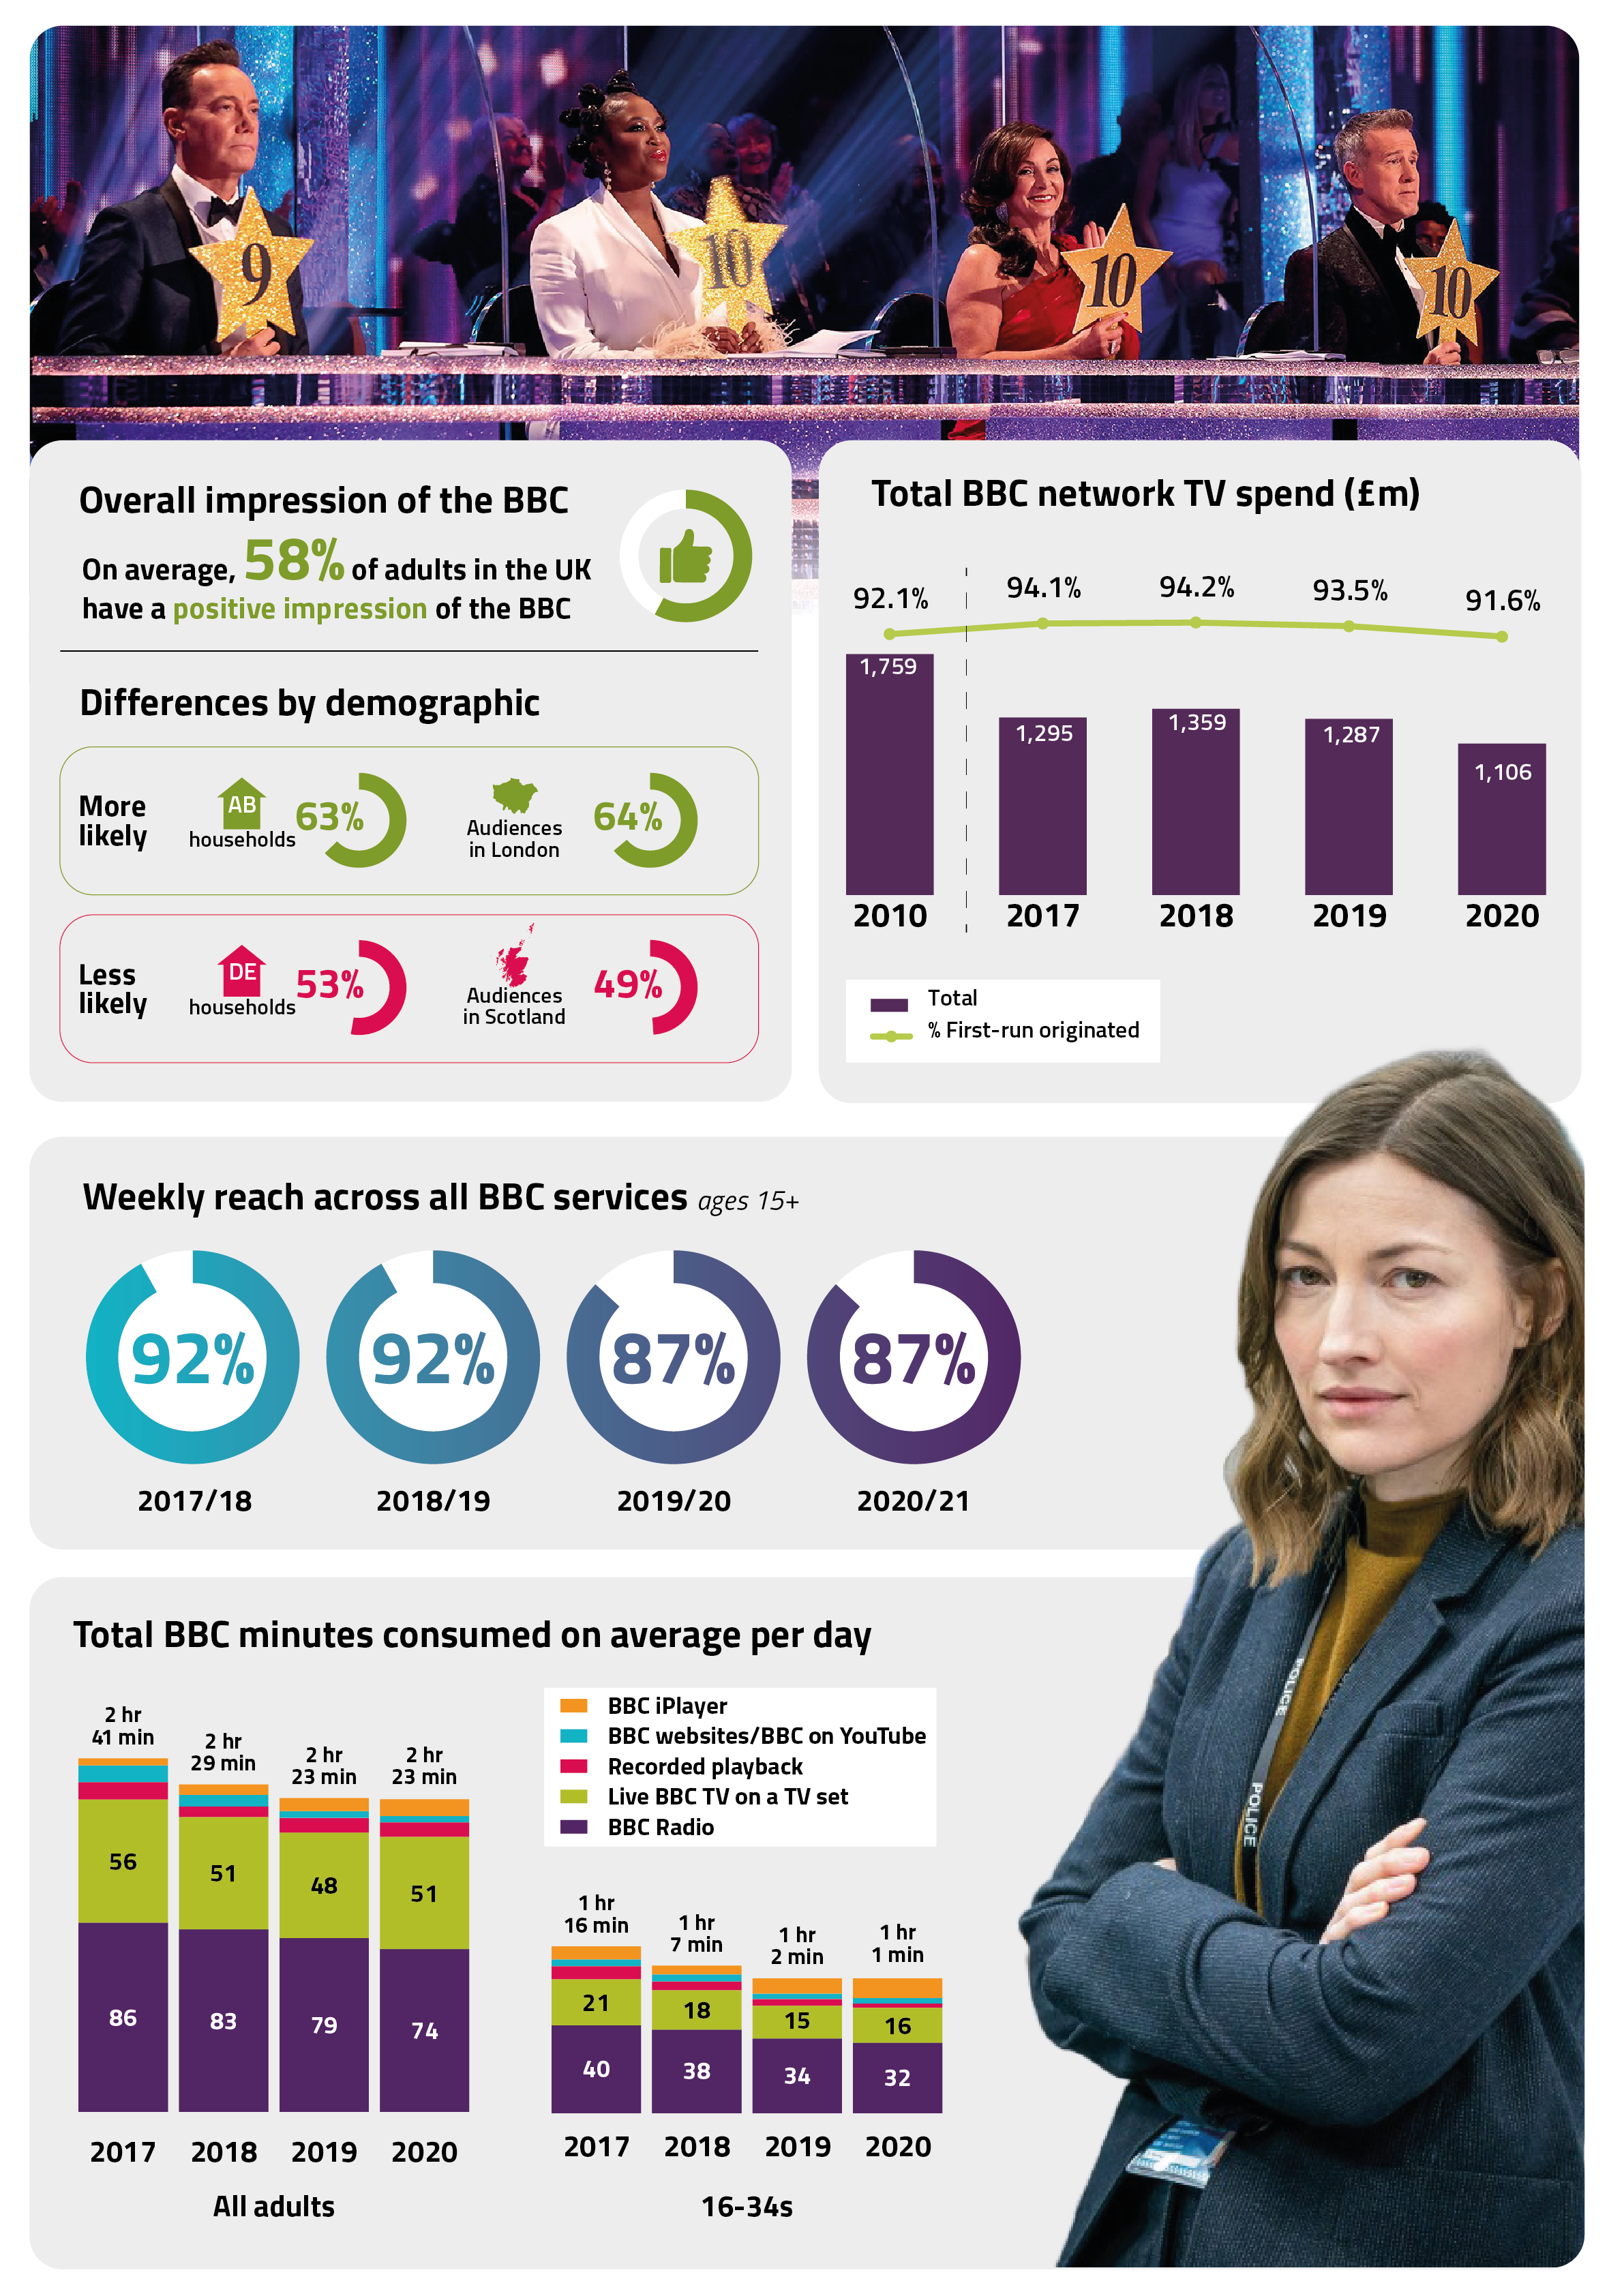 Dashboard showing key findings for the BBC's overall performance across the Charter period. On average, 58% of adults in the UK have a positive impression of the BBC. AB households and audiences in London are more likely to have a positive impression of the BBC whereas DE households and audiences in Scotland are less likely to have a positive impression of the BBC. Total BBC network TV spend has decreased from 94.1% in 2017 to 91.6% in 2020. Weekly reach across all BBC services (for those aged 15+) decreased from 92% in 2017/18 to 87% in 2020/21. Total BBC minutes consumed on average per day by all adults, decreased from 2 hours and 41 minutes in 2017 to 2 hours and 23 minutes in 2020. Within this pattern, minutes of live BBC TV on a TV set and BBC radio decreased every year between 2017-2020, whereas minutes of BBC iPlayer consumed on average per day increased every year 2017-2020. Total BBC minutes consumed on average per day by people aged 16-34, has decreased from 1 hour and 16 minutes in 2017 to 1 hour and 1 minute in 2020.  